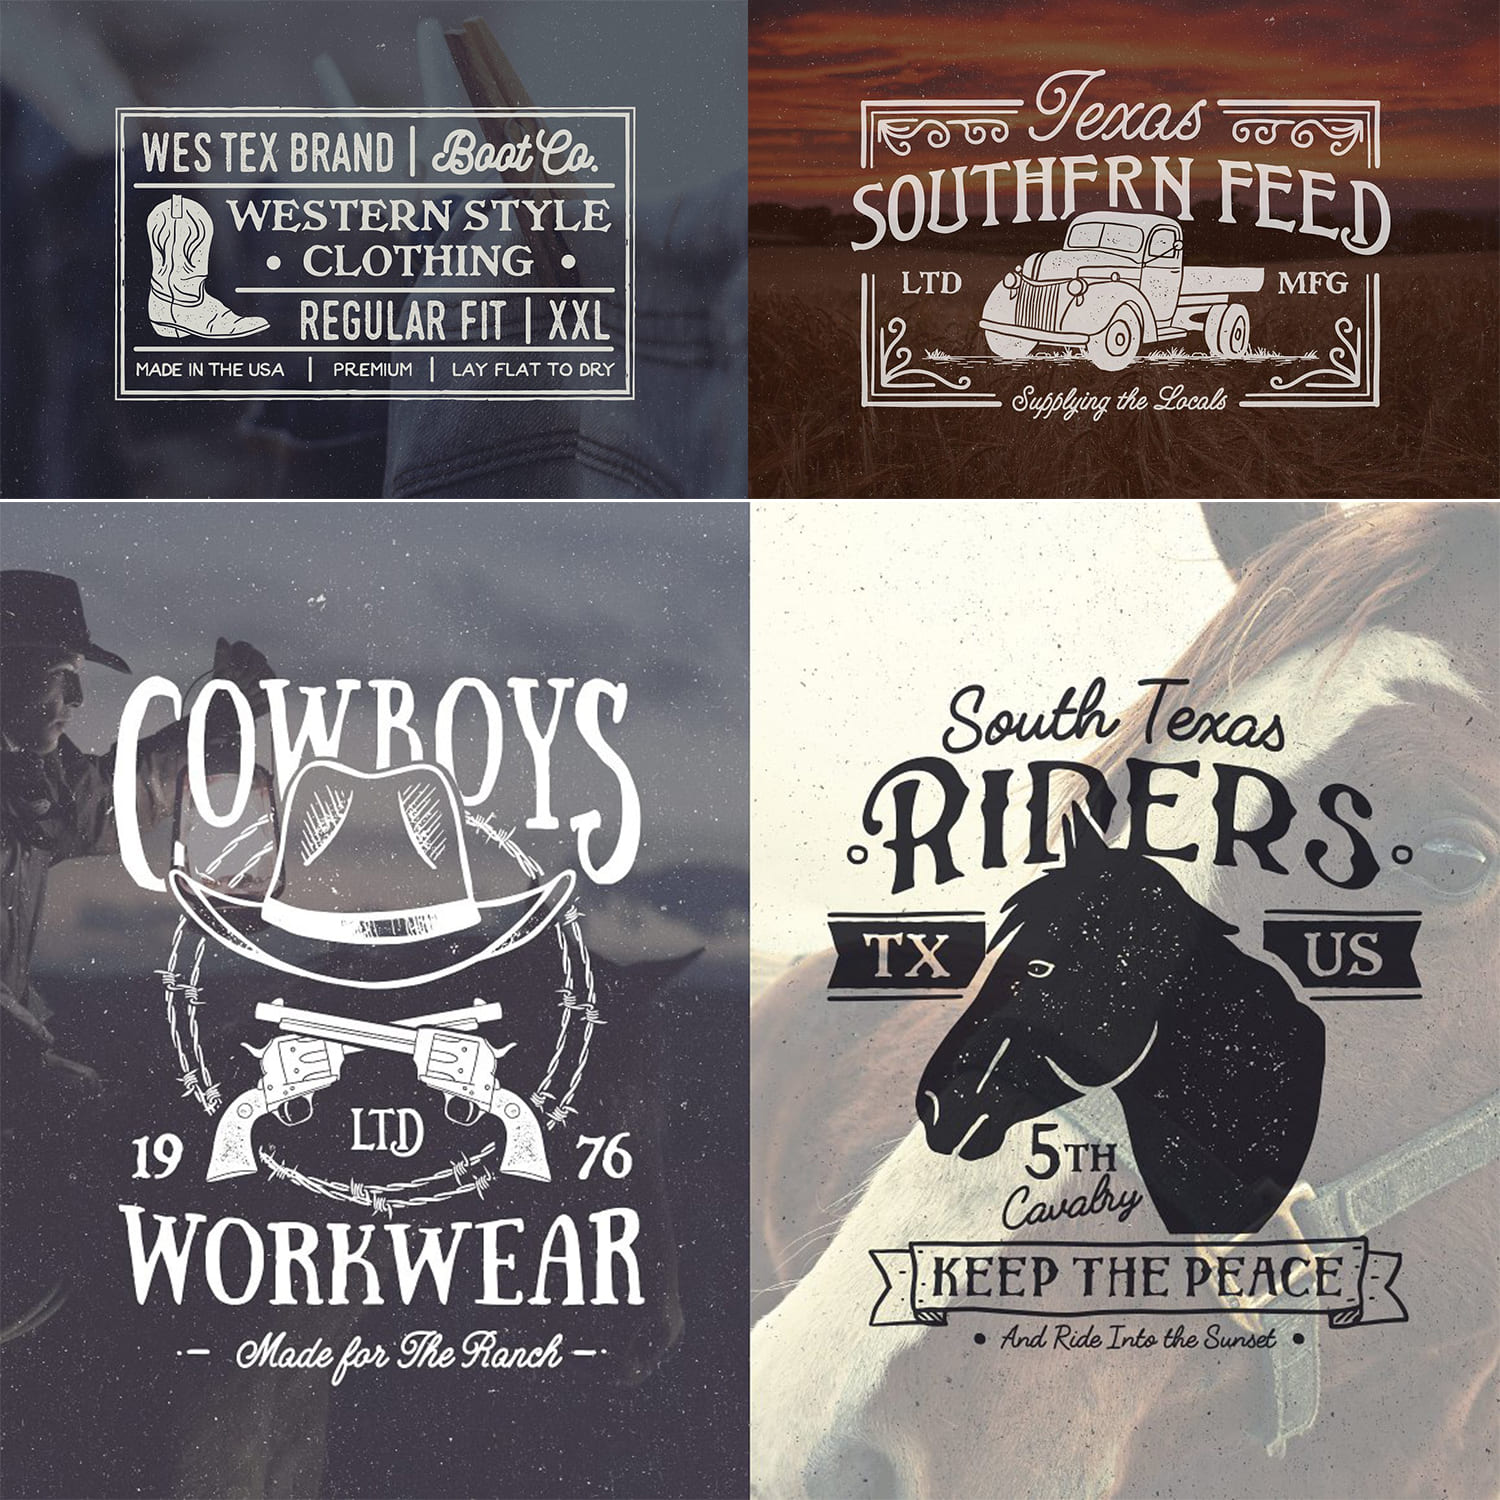 Farmhouse Vintage Badges and Logos cover image.